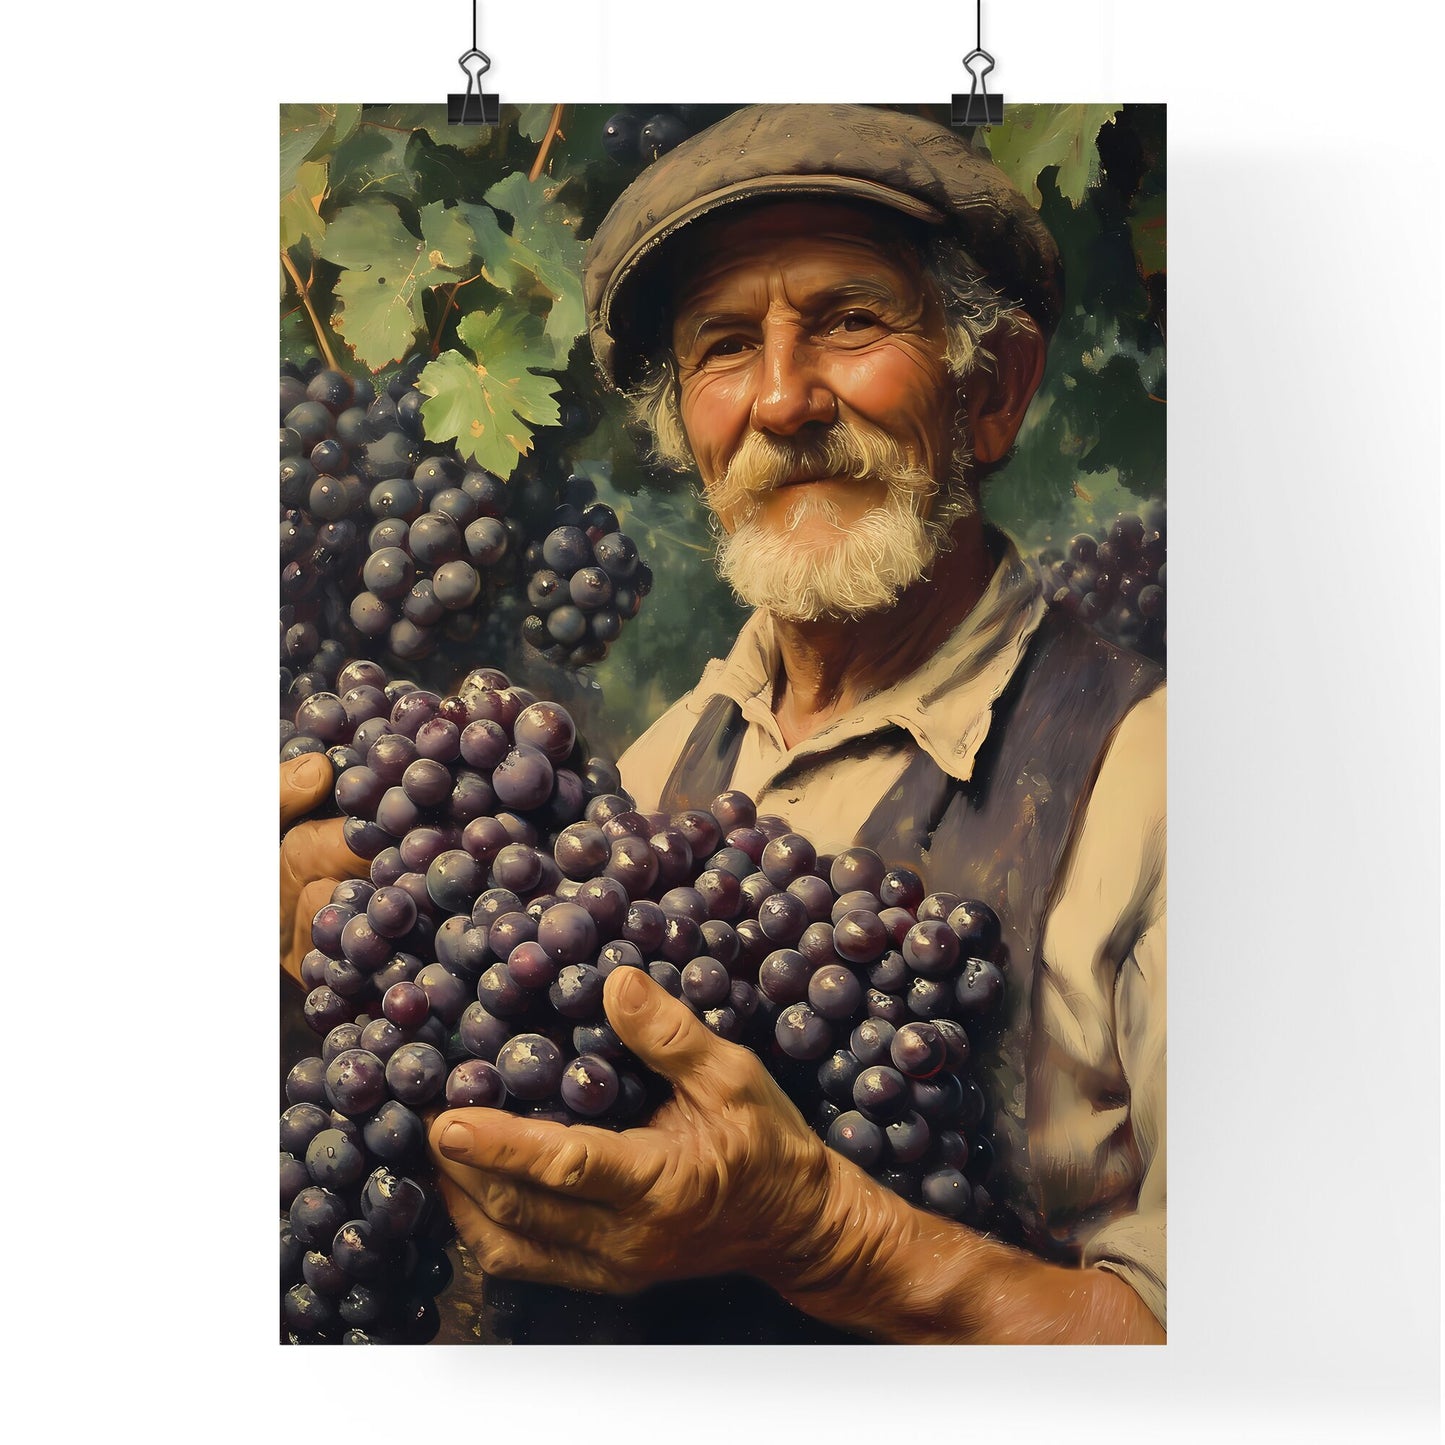 A French vineyard owner - Art print of a man holding grapes in his hands Default Title